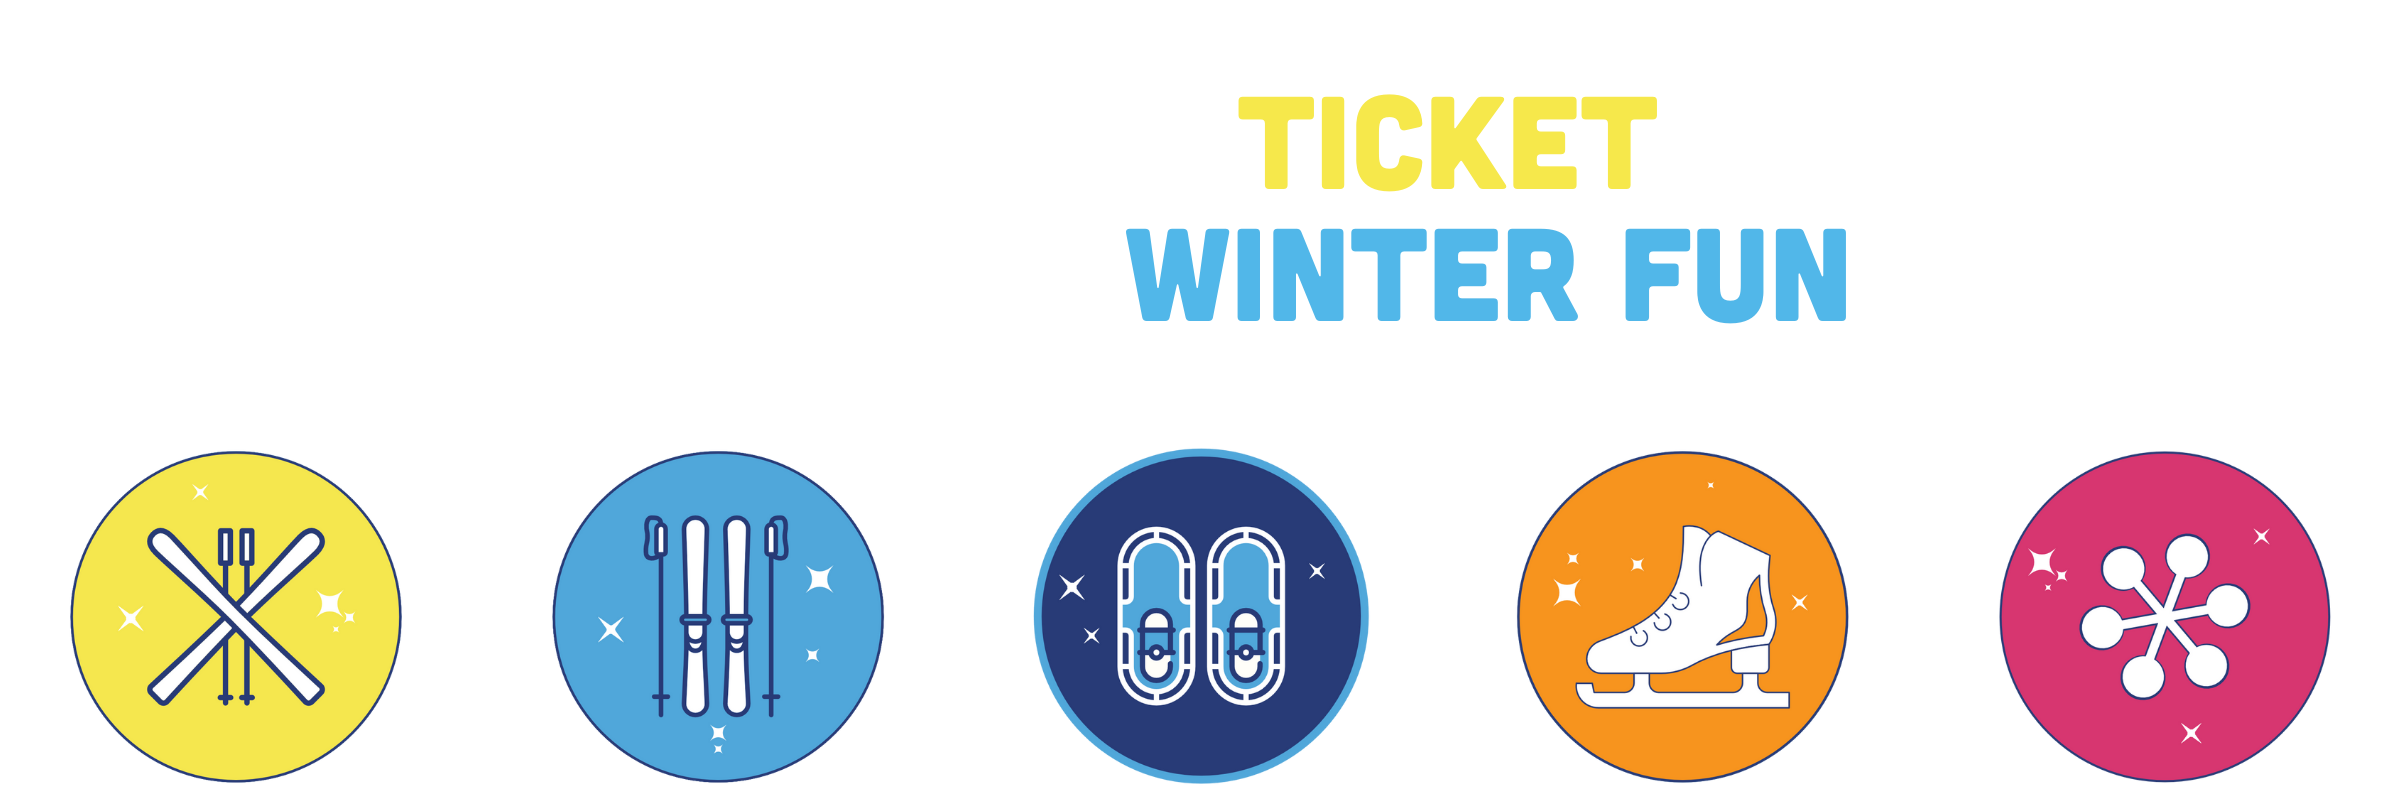 your ticket to outdoor winter fun 11